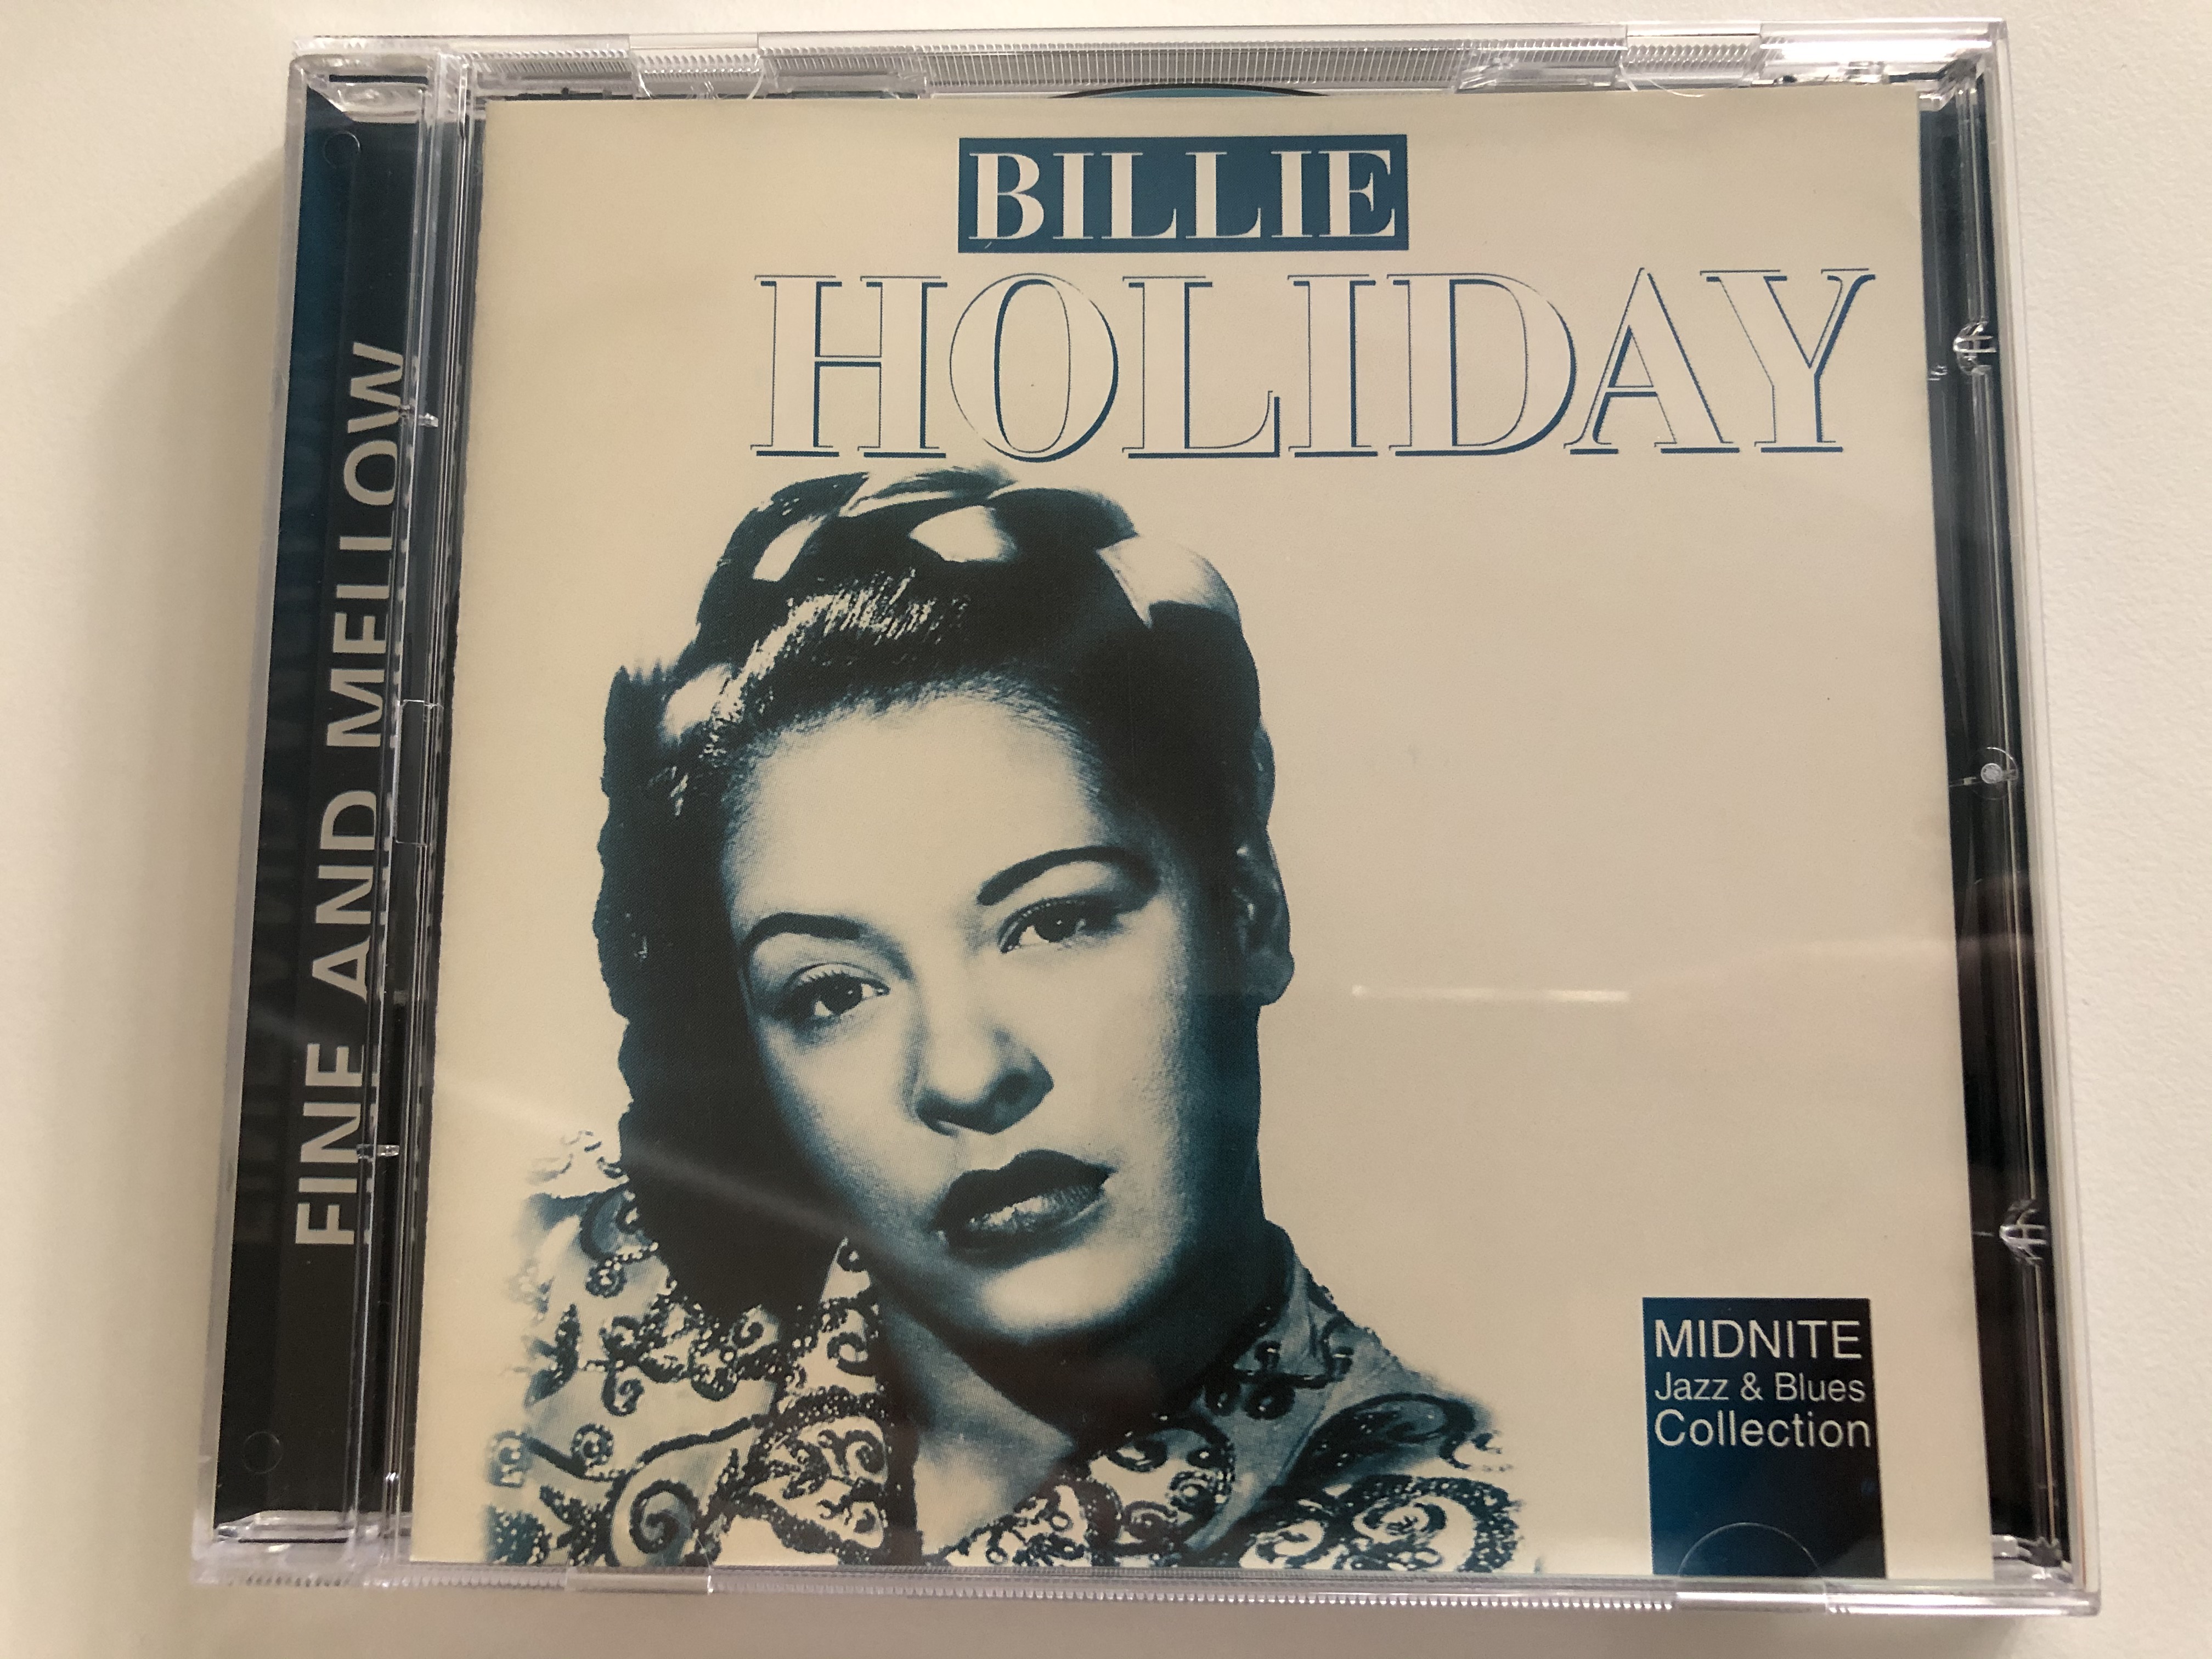 billie-holiday-fine-and-mellow-midnite-jazz-blues-collection-weton-wesgram-audio-cd-2000-mjb062-1-.jpg